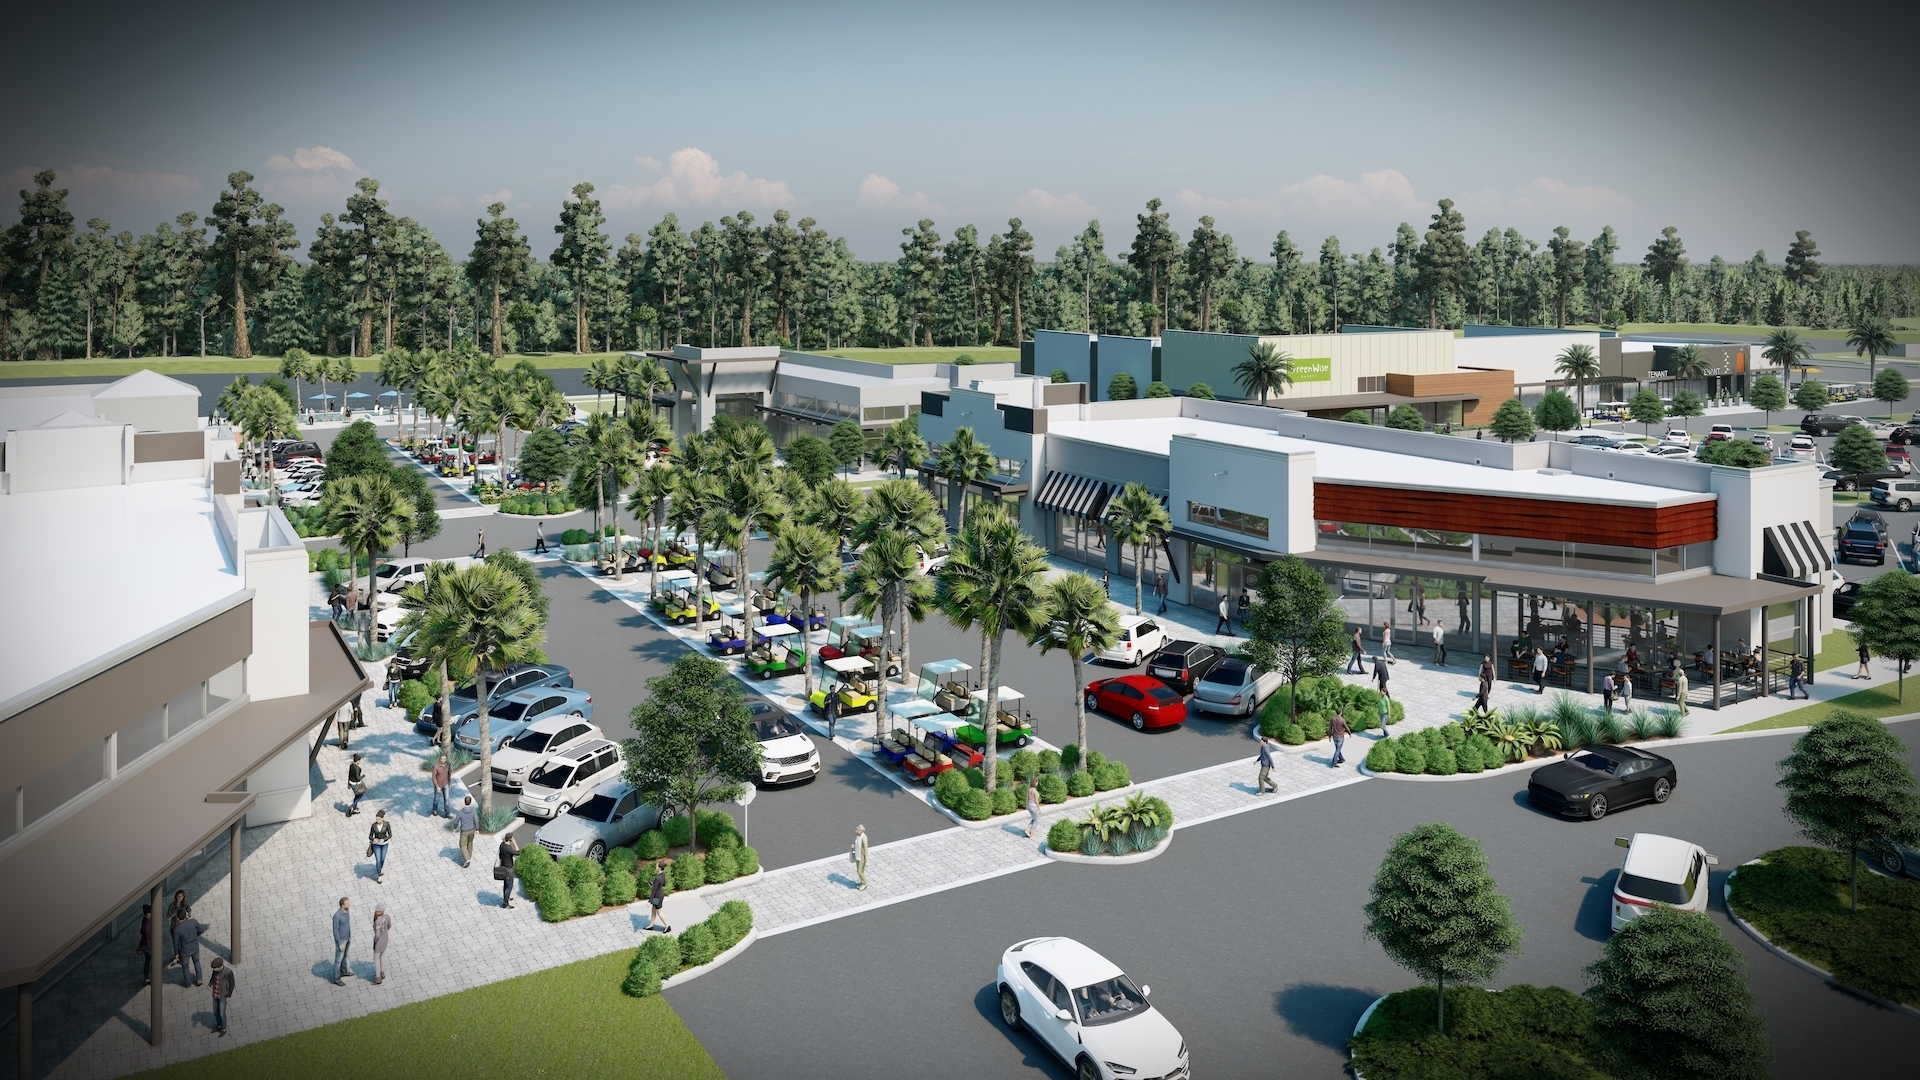 GreenWise Market is coming to Nocatee Town Center, shown in the top right of this rendering.